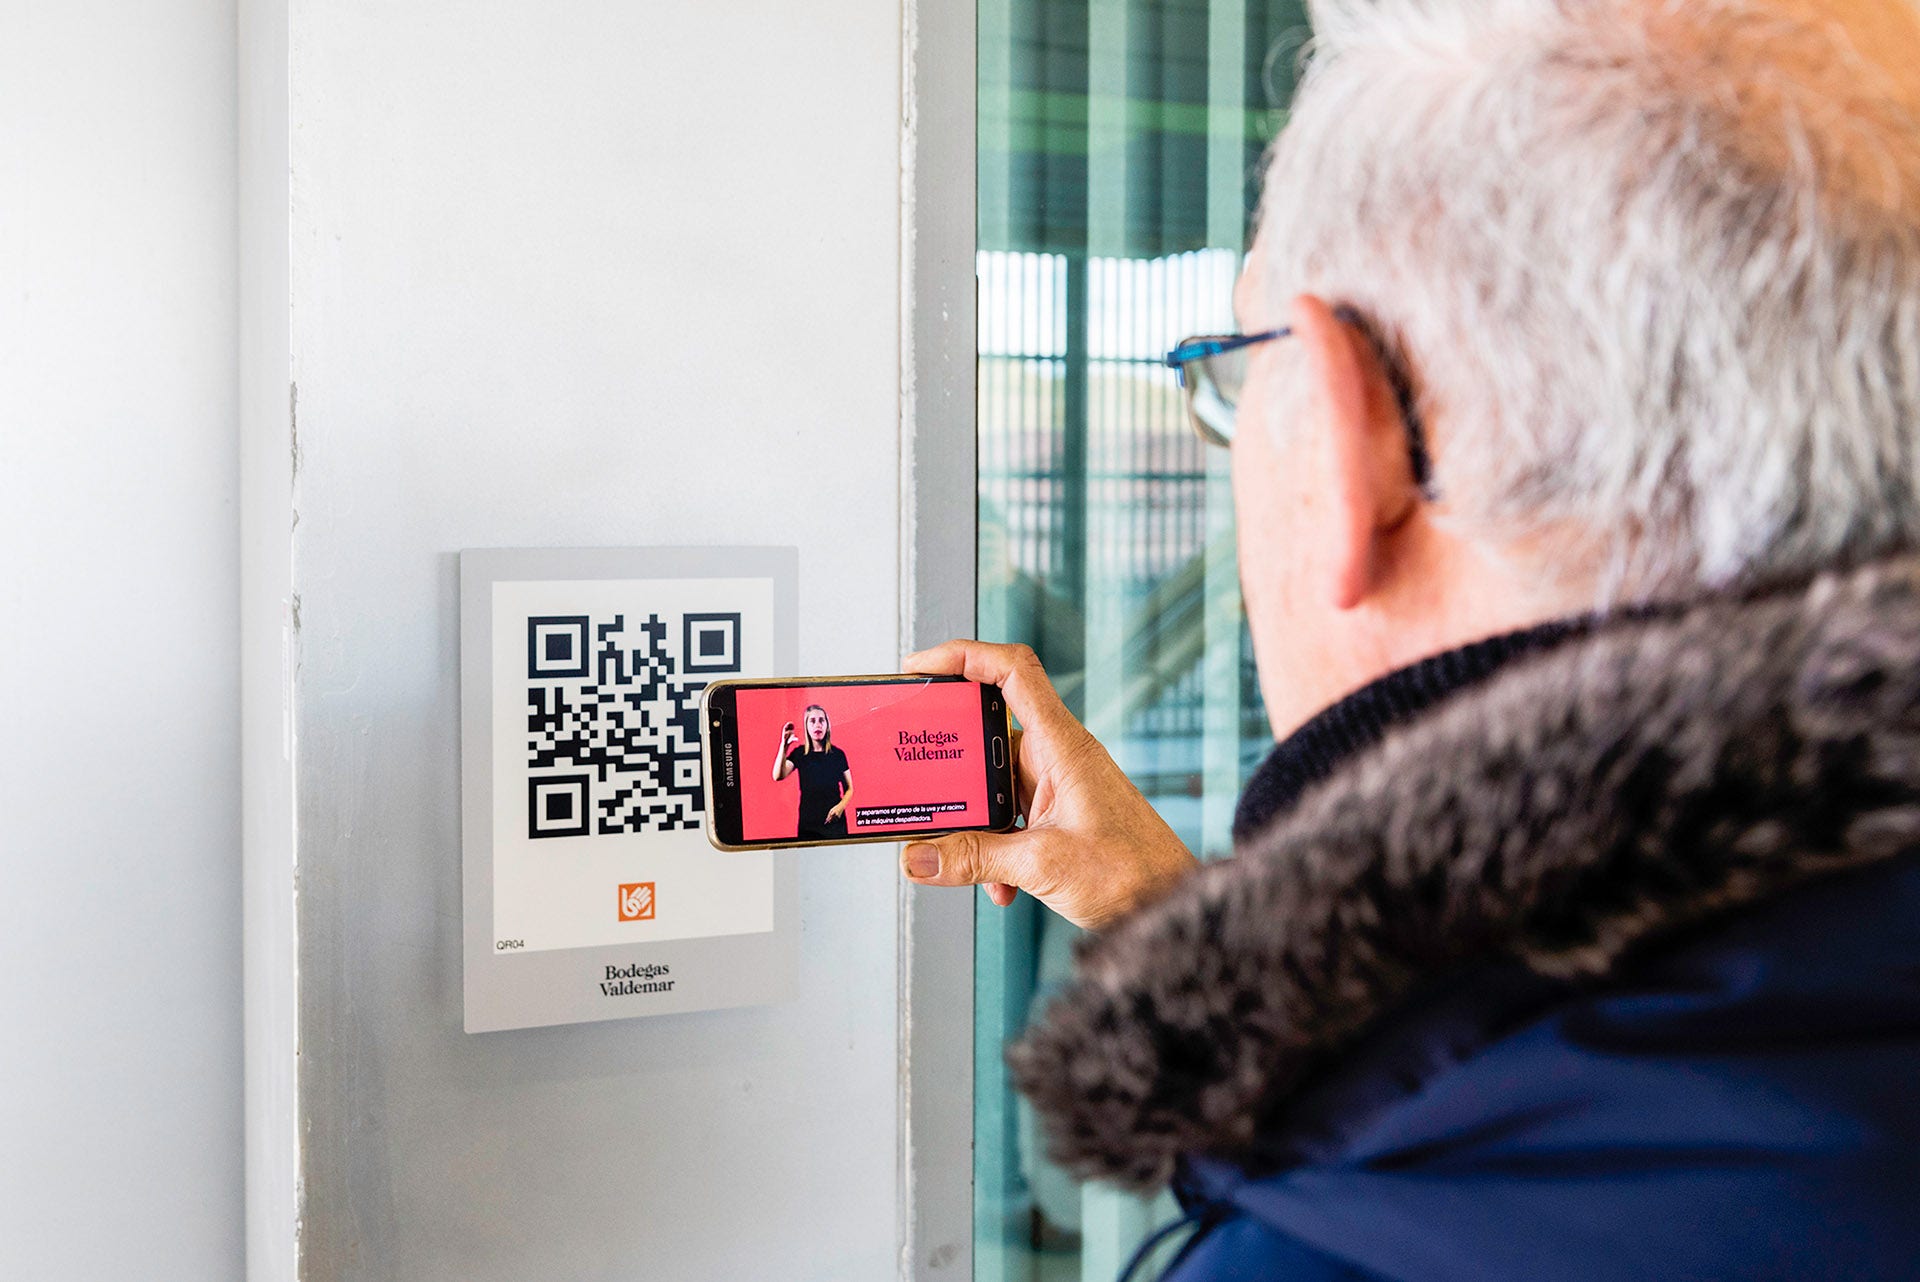 A man scanning a QR code with his phone at a winery